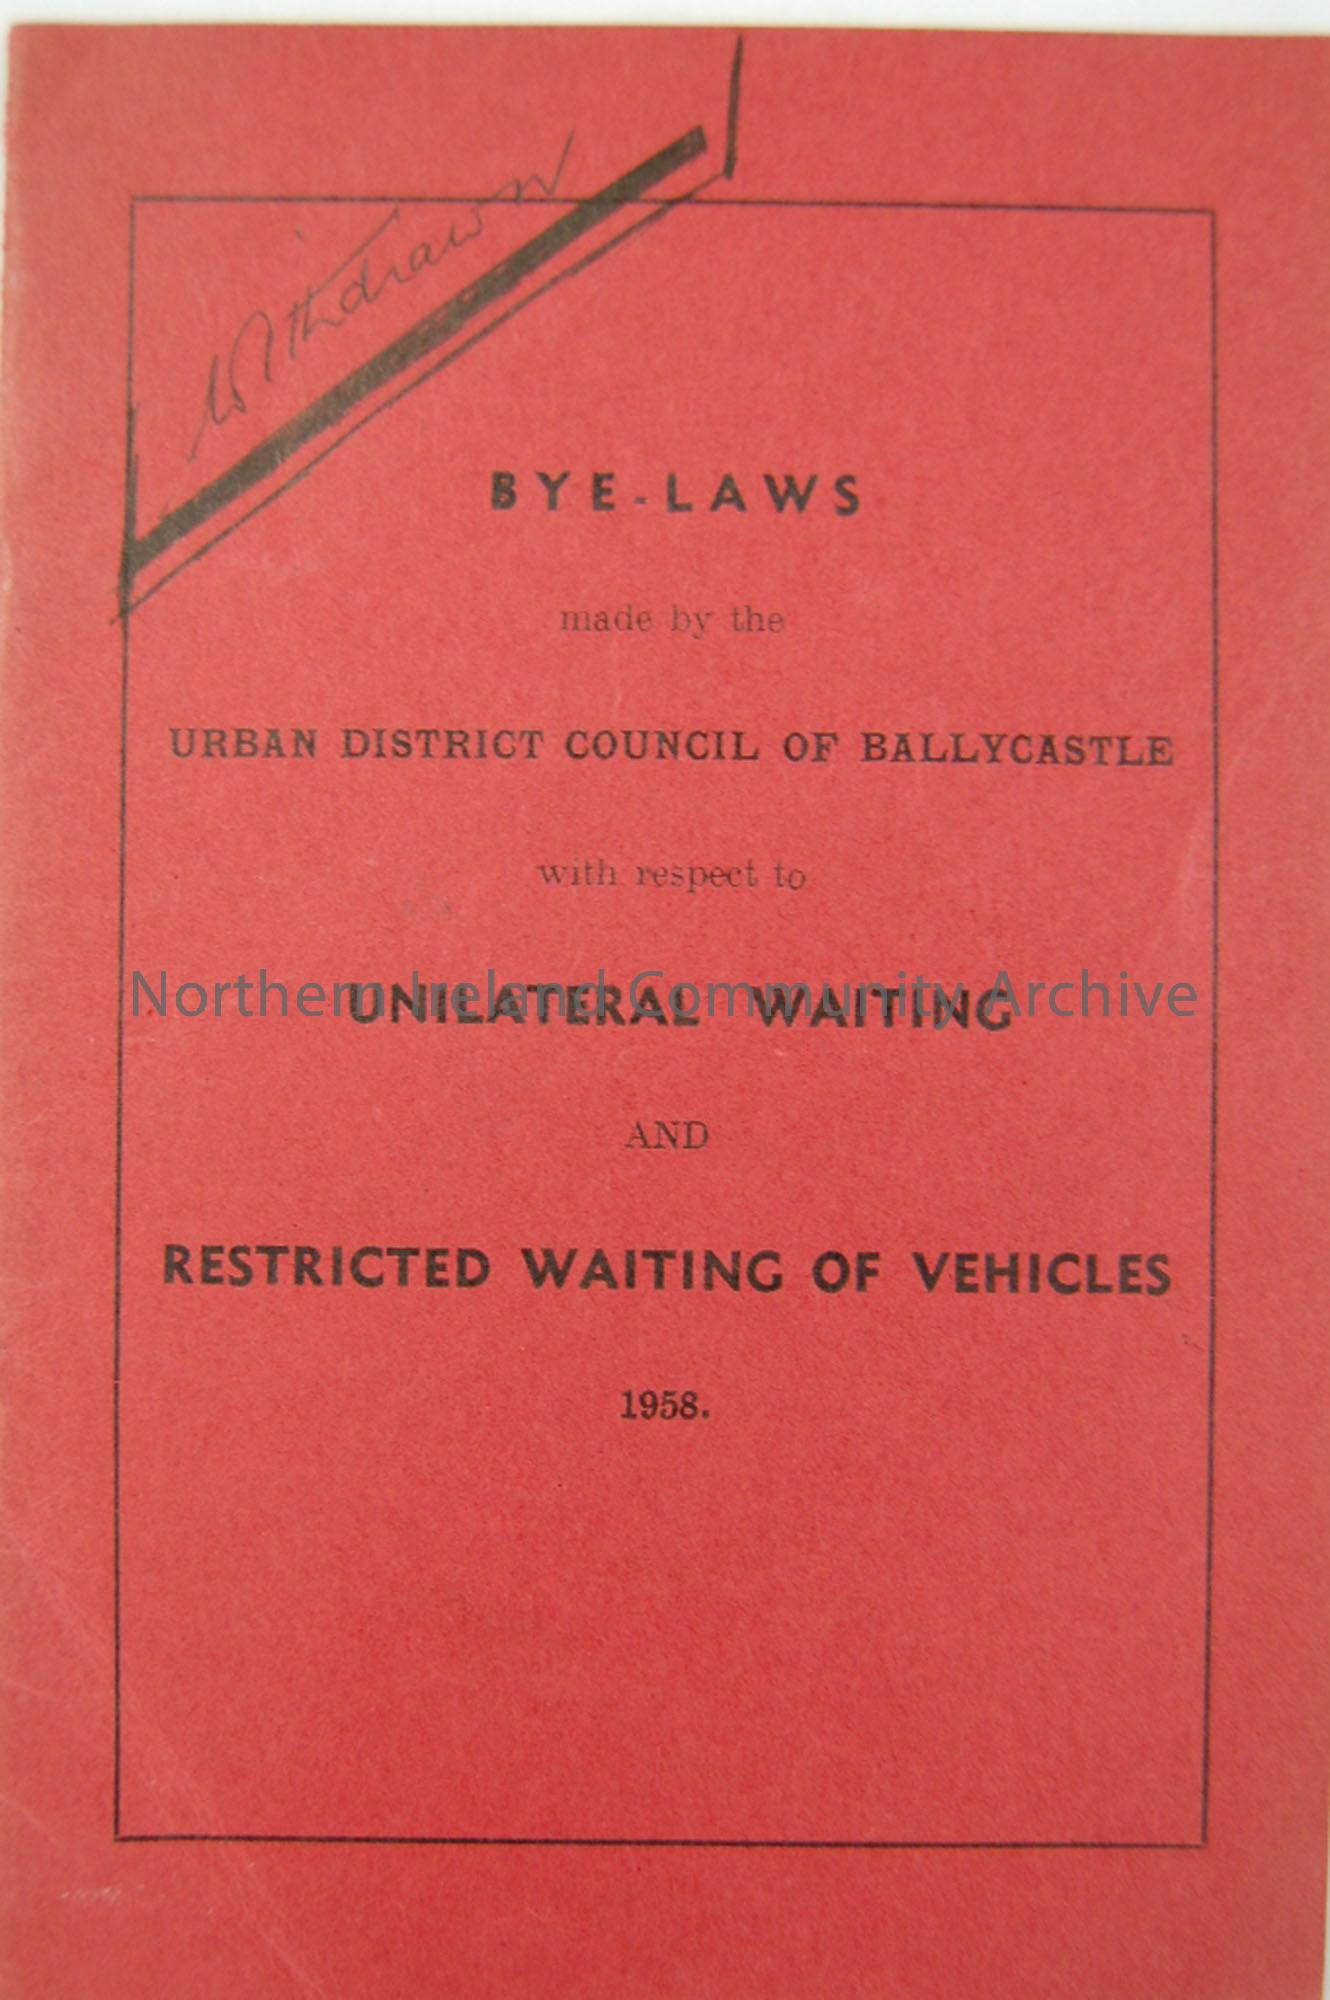 Bye-laws made by the Urban District Council of Ballycastle with respect to unilateral waiting and restricted waiting of vehicles 1958.